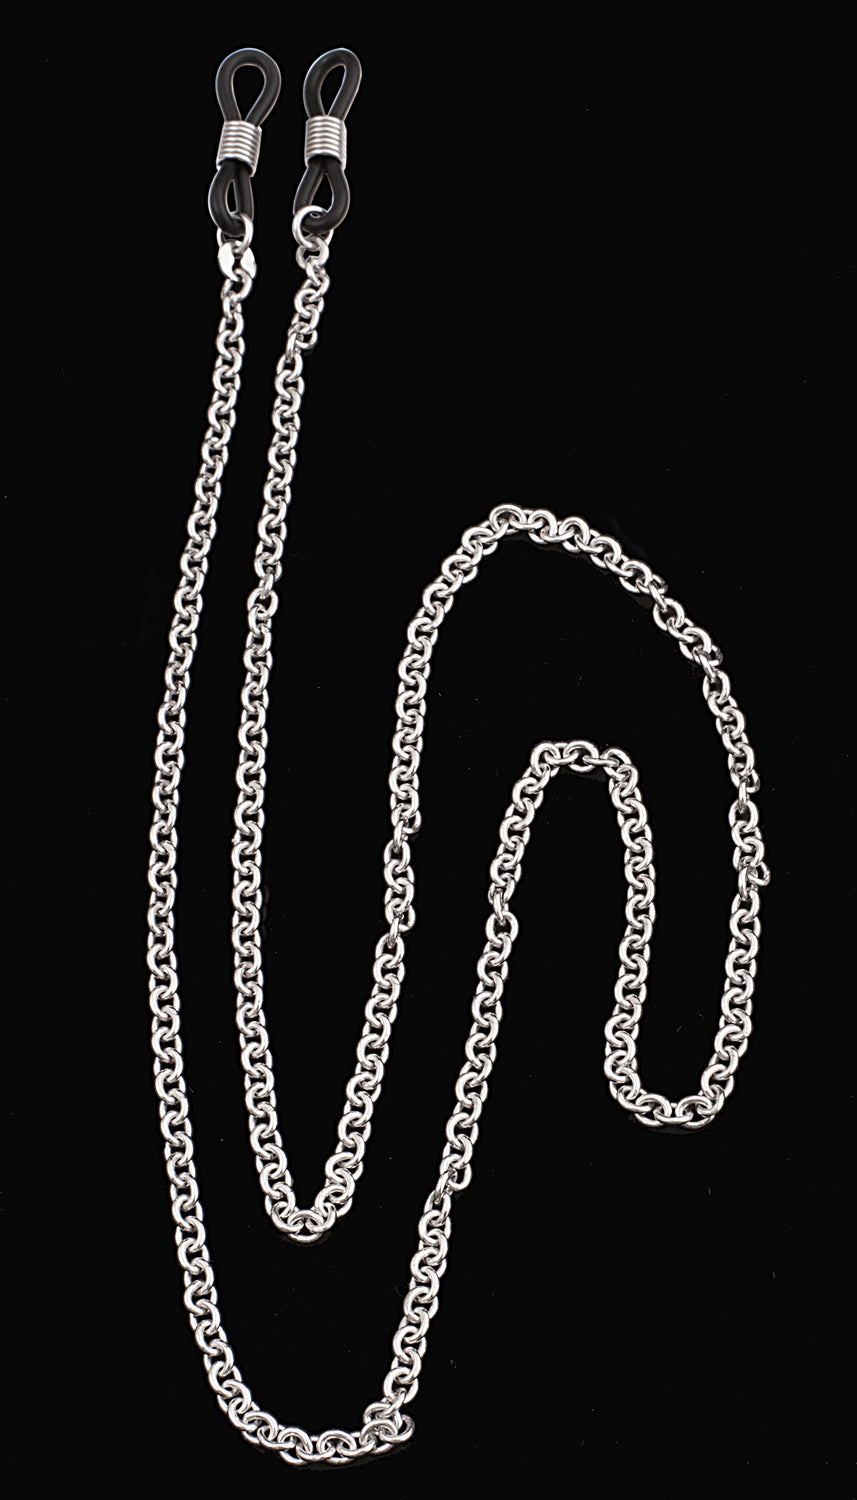 STERLING SILVER CHAIN 20